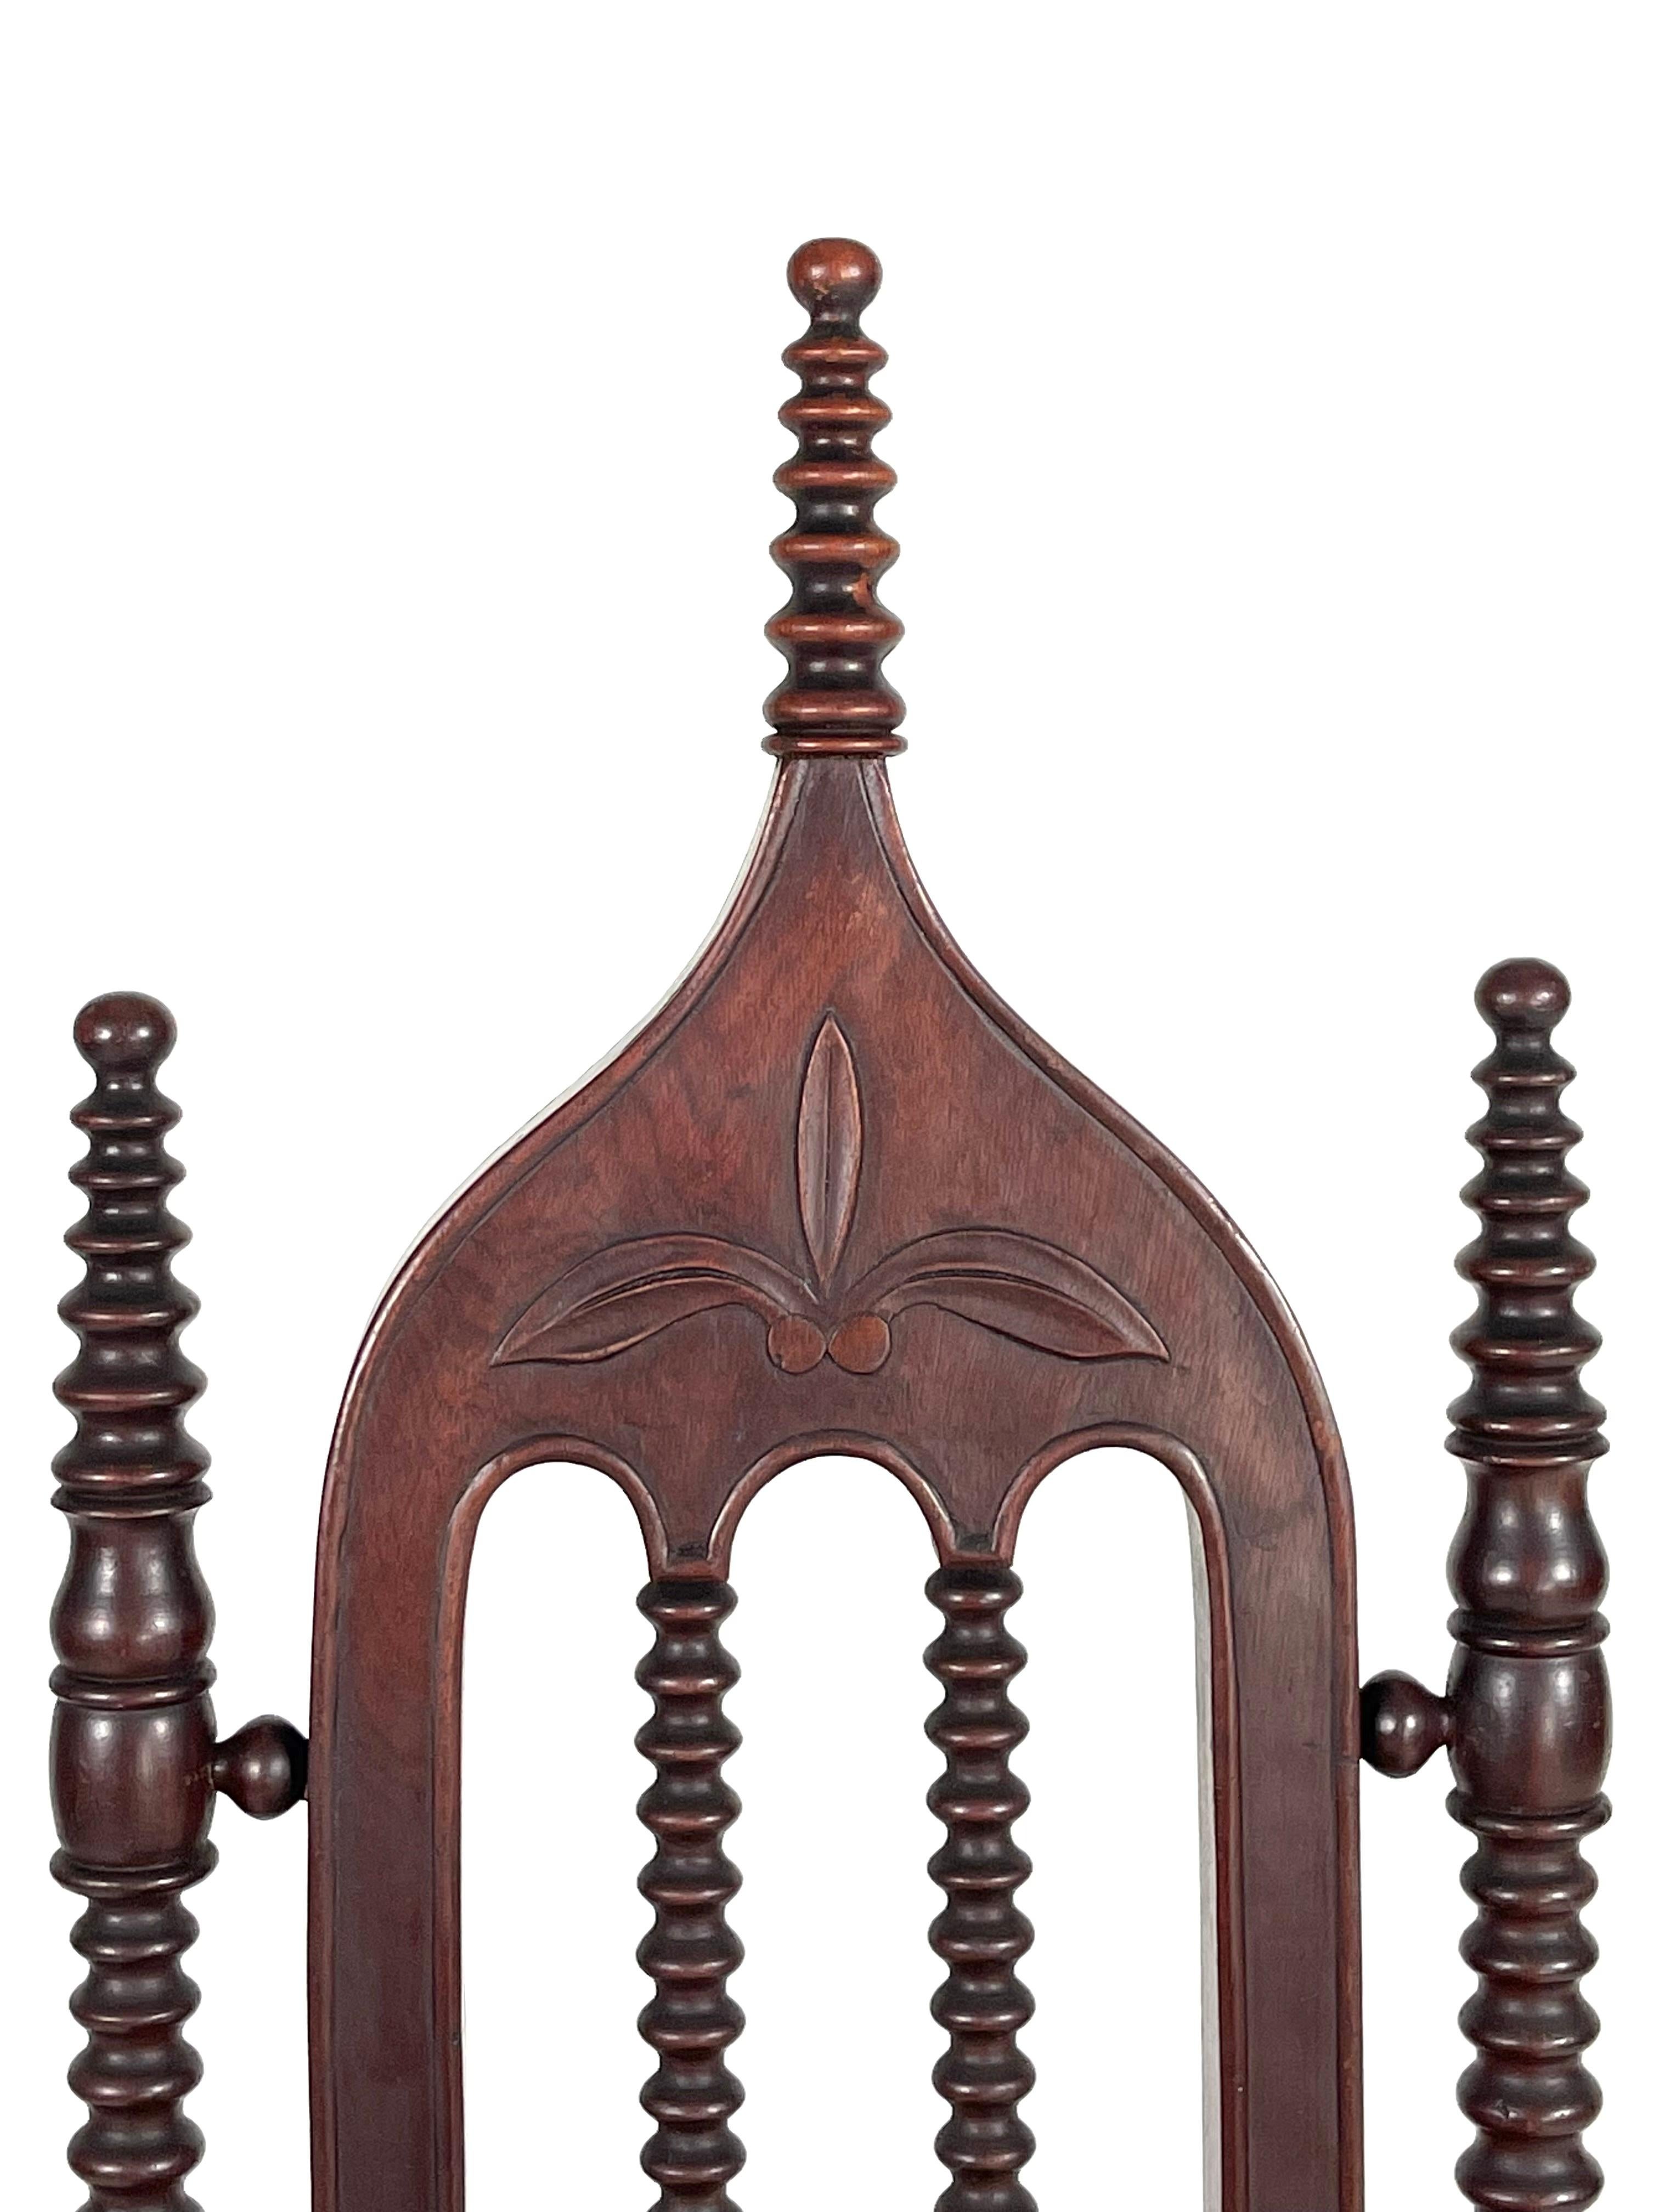 A 19th Century Gothic Revival side chair with ogee-arched back decorated with a carved stylized fleur-de-lys in the center and with turned “pinnacles” and legs. The seat is upholstered with hand block printed fabric made by a local artist.